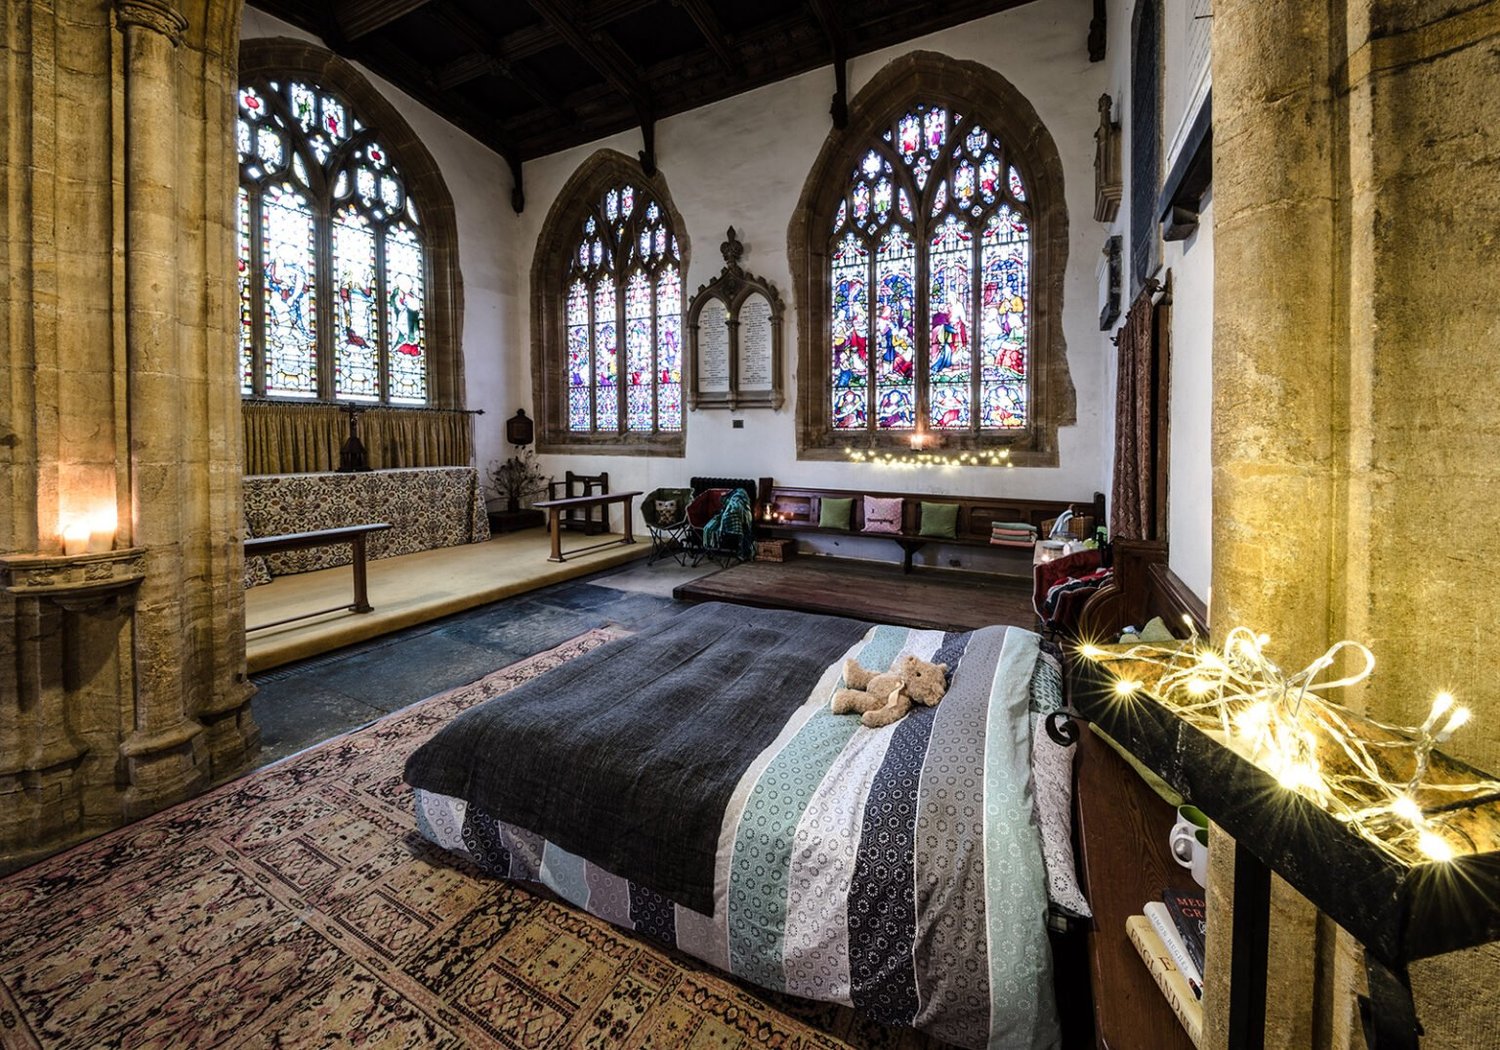 Champing, or church camping, at the Church of All Saints in Langport, Somerset, England.  This photo is being used for non-commercial purpose and not in connection with selling a good or service.